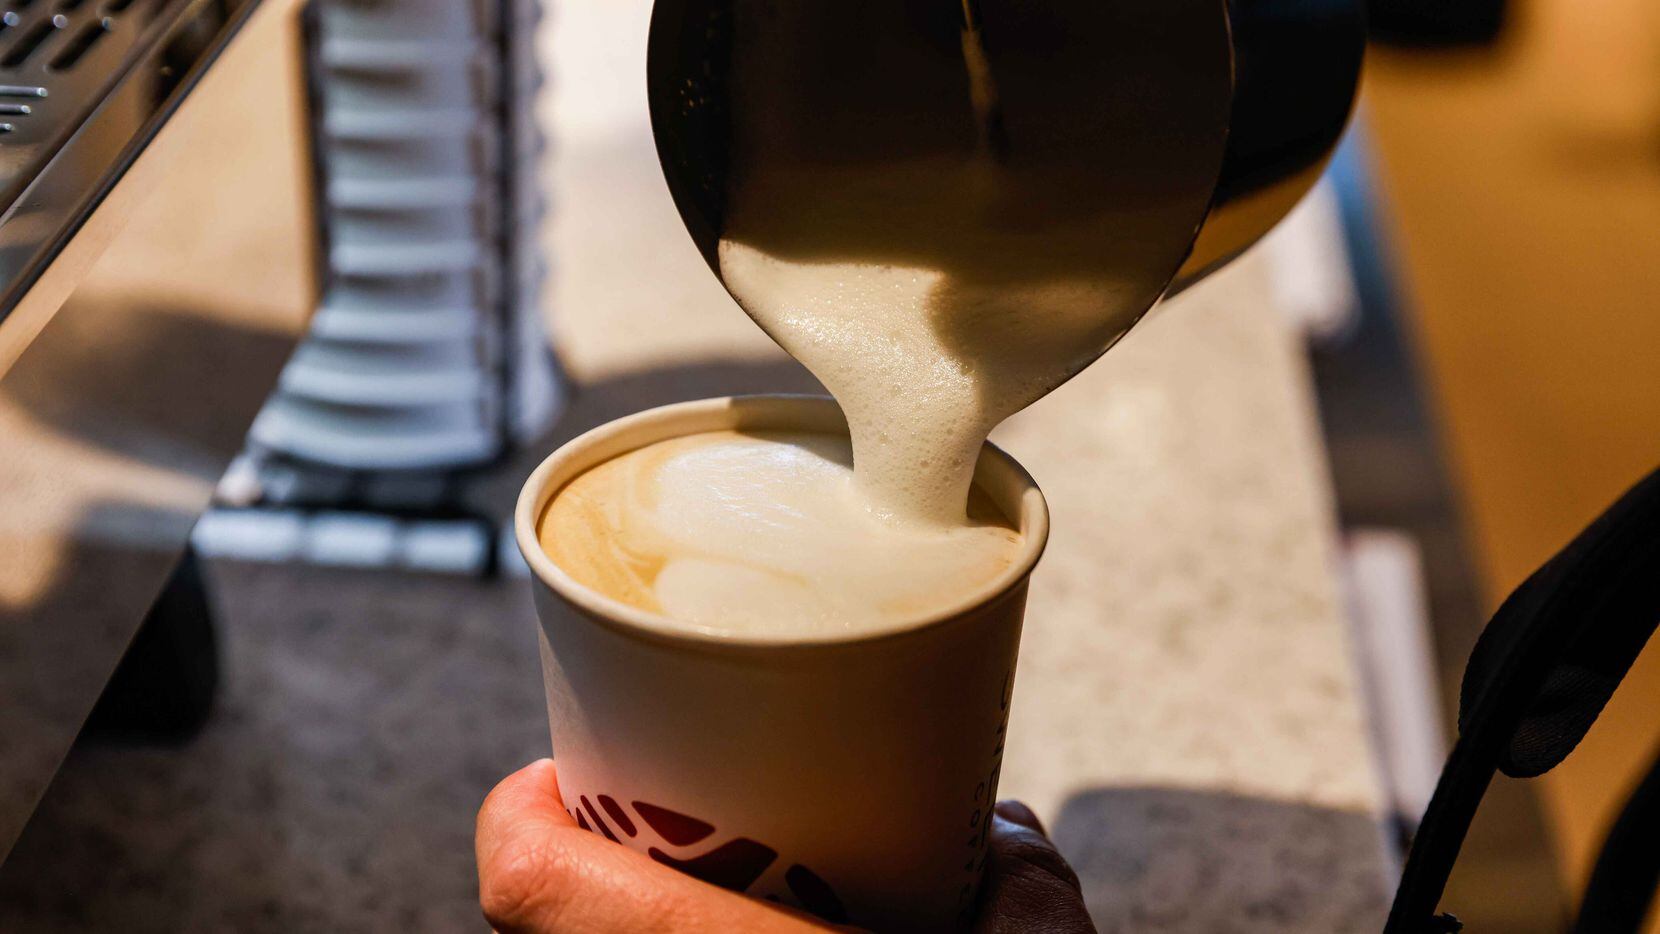 Elena Charis, an employee at Sweetwaters Coffee & Tea in Frisco, makes a latte before...